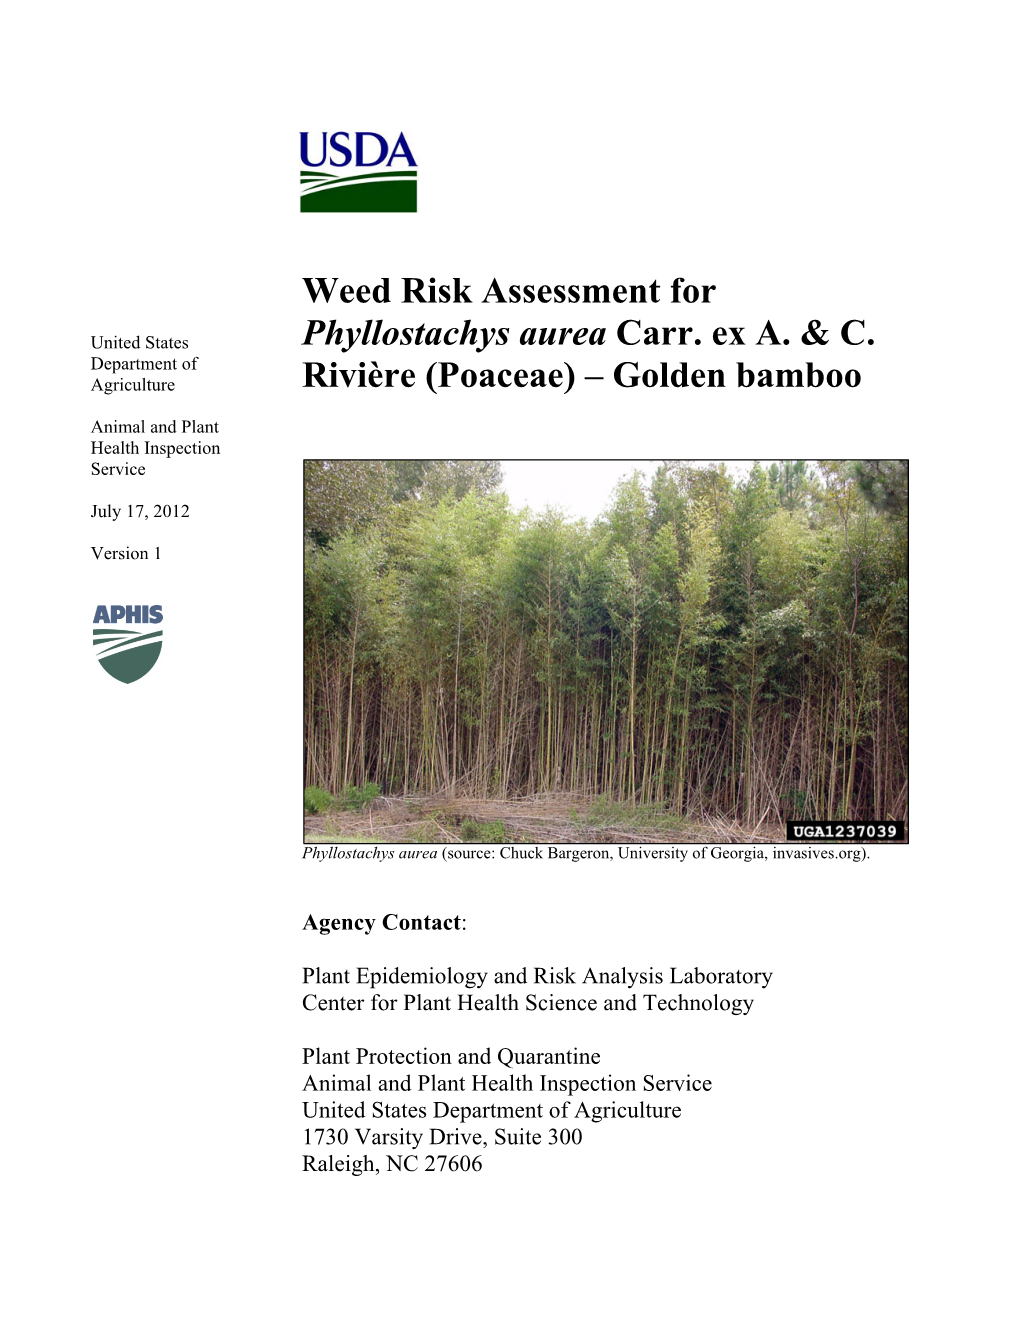 Weed Risk Assessment for Phyllostachys Aurea Carr. Ex A. & C